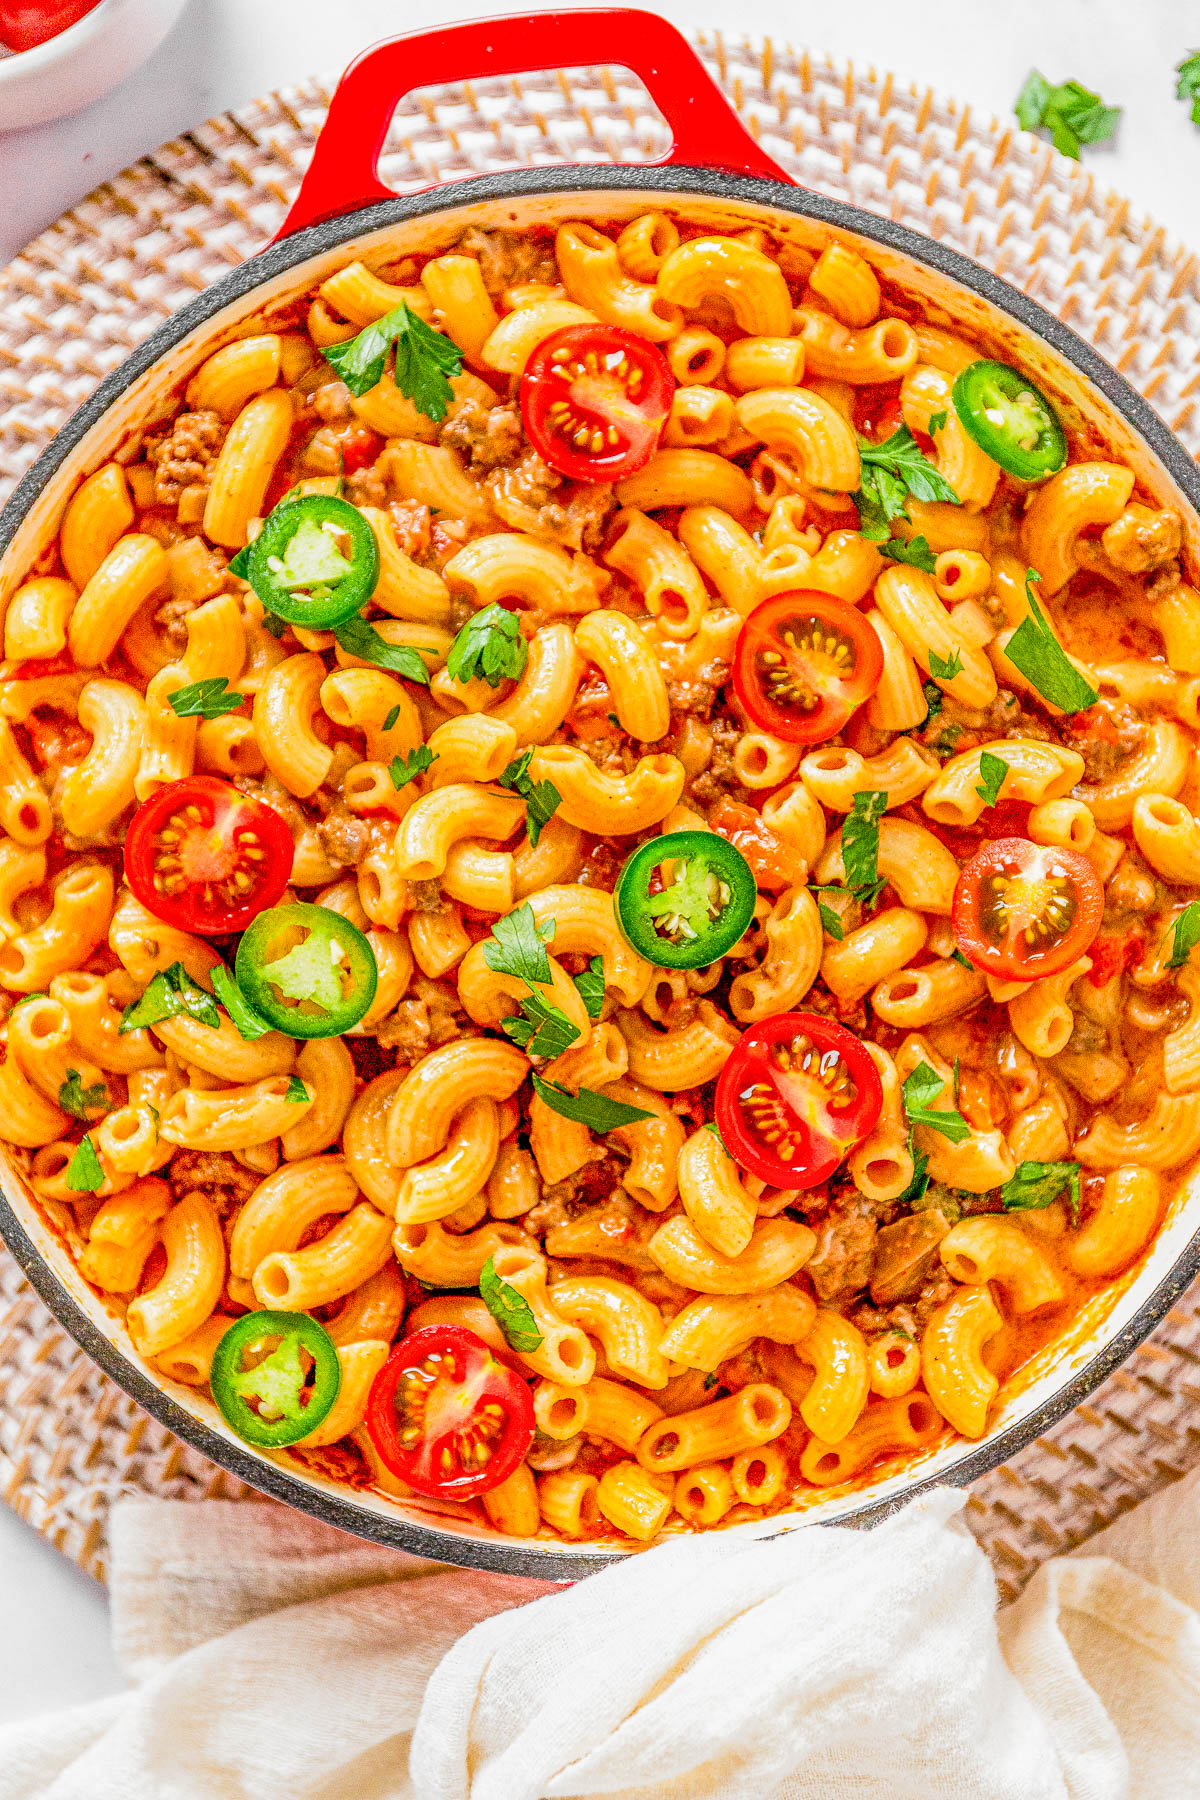 A skillet filled with macaroni pasta mixed with ground meat, sliced jalapeños, cherry tomatoes, and garnished with fresh herbs.